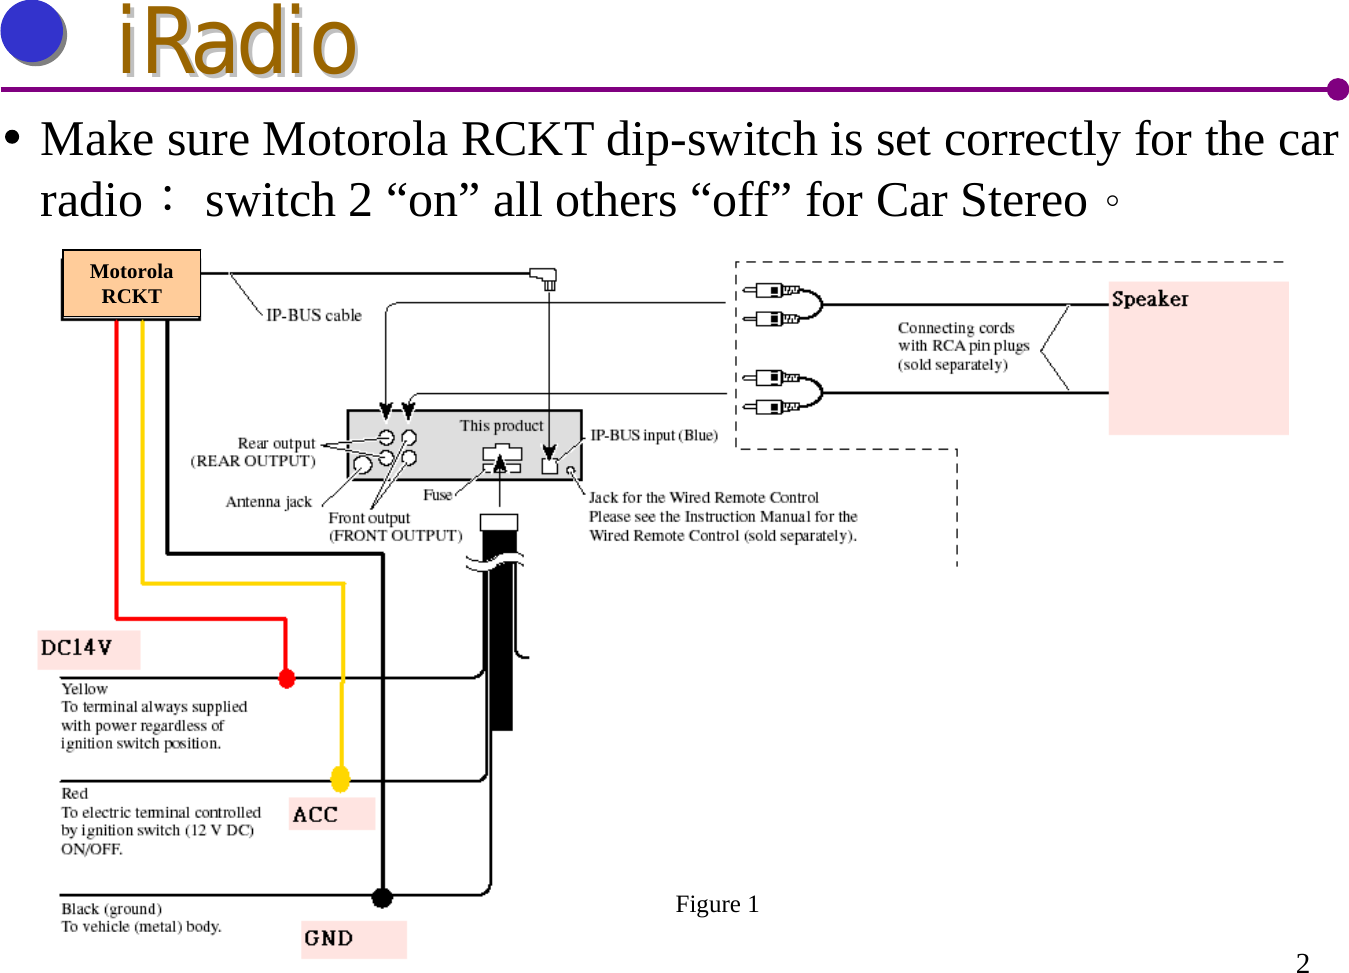 2iRadioiRadioMake sure Motorola RCKT dip-switch is set correctly for the car radio：switch 2 “on” all others “off” for Car Stereo。Figure 1MotorolaRCKT